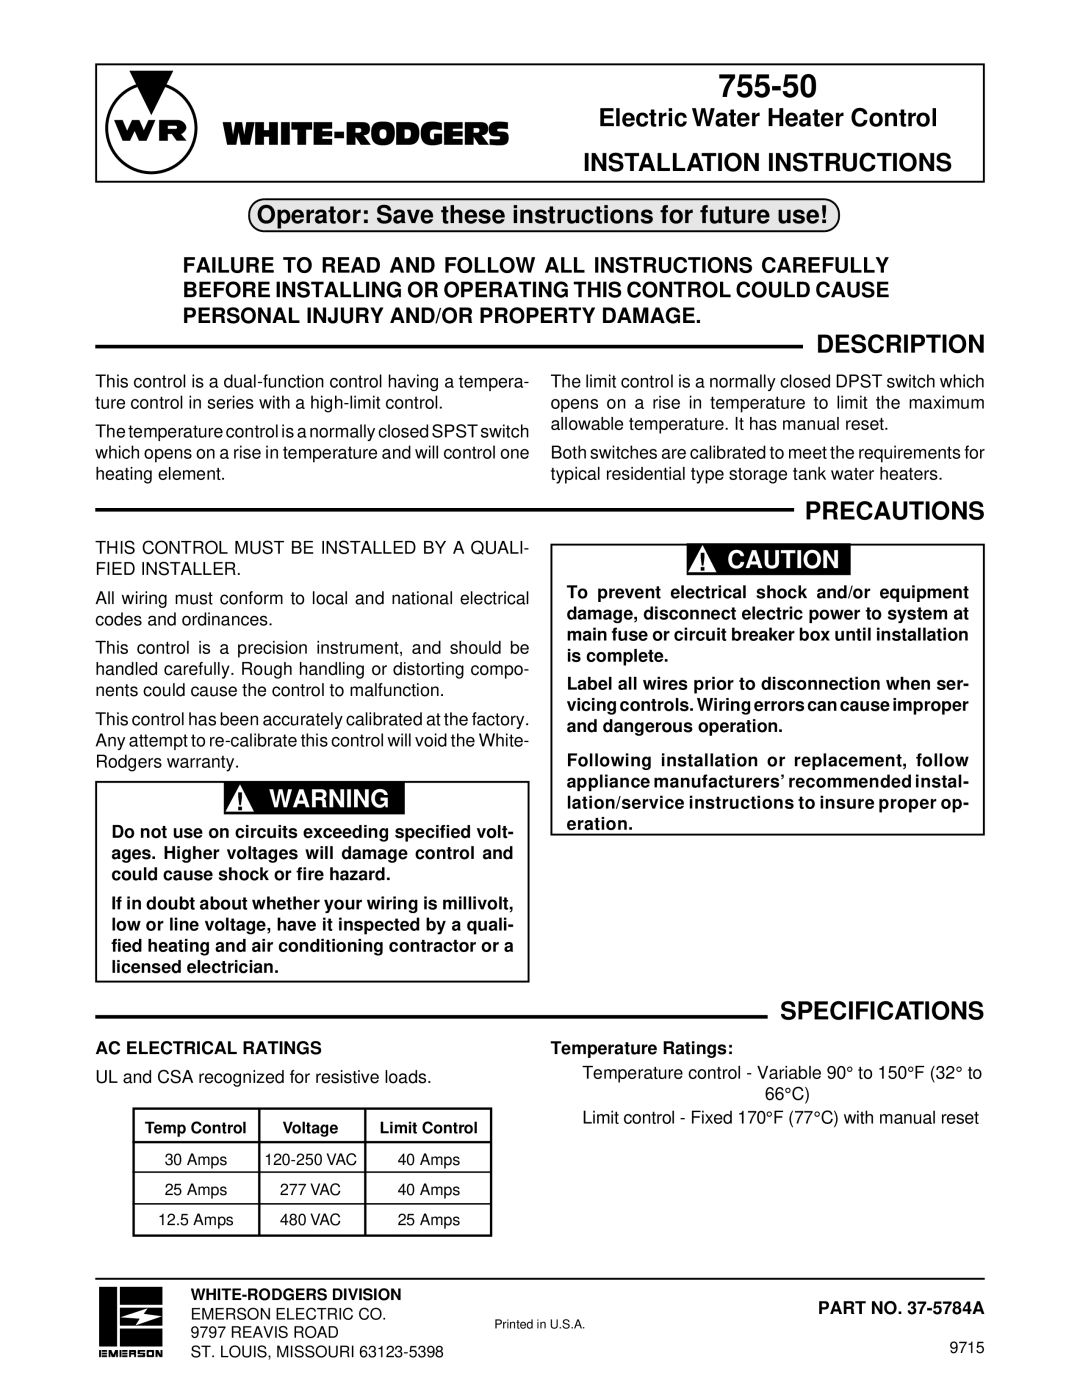 White Rodgers 755-50 specifications White-Rodgers, Electric Water Heater Control, Installation Instructions, Description 